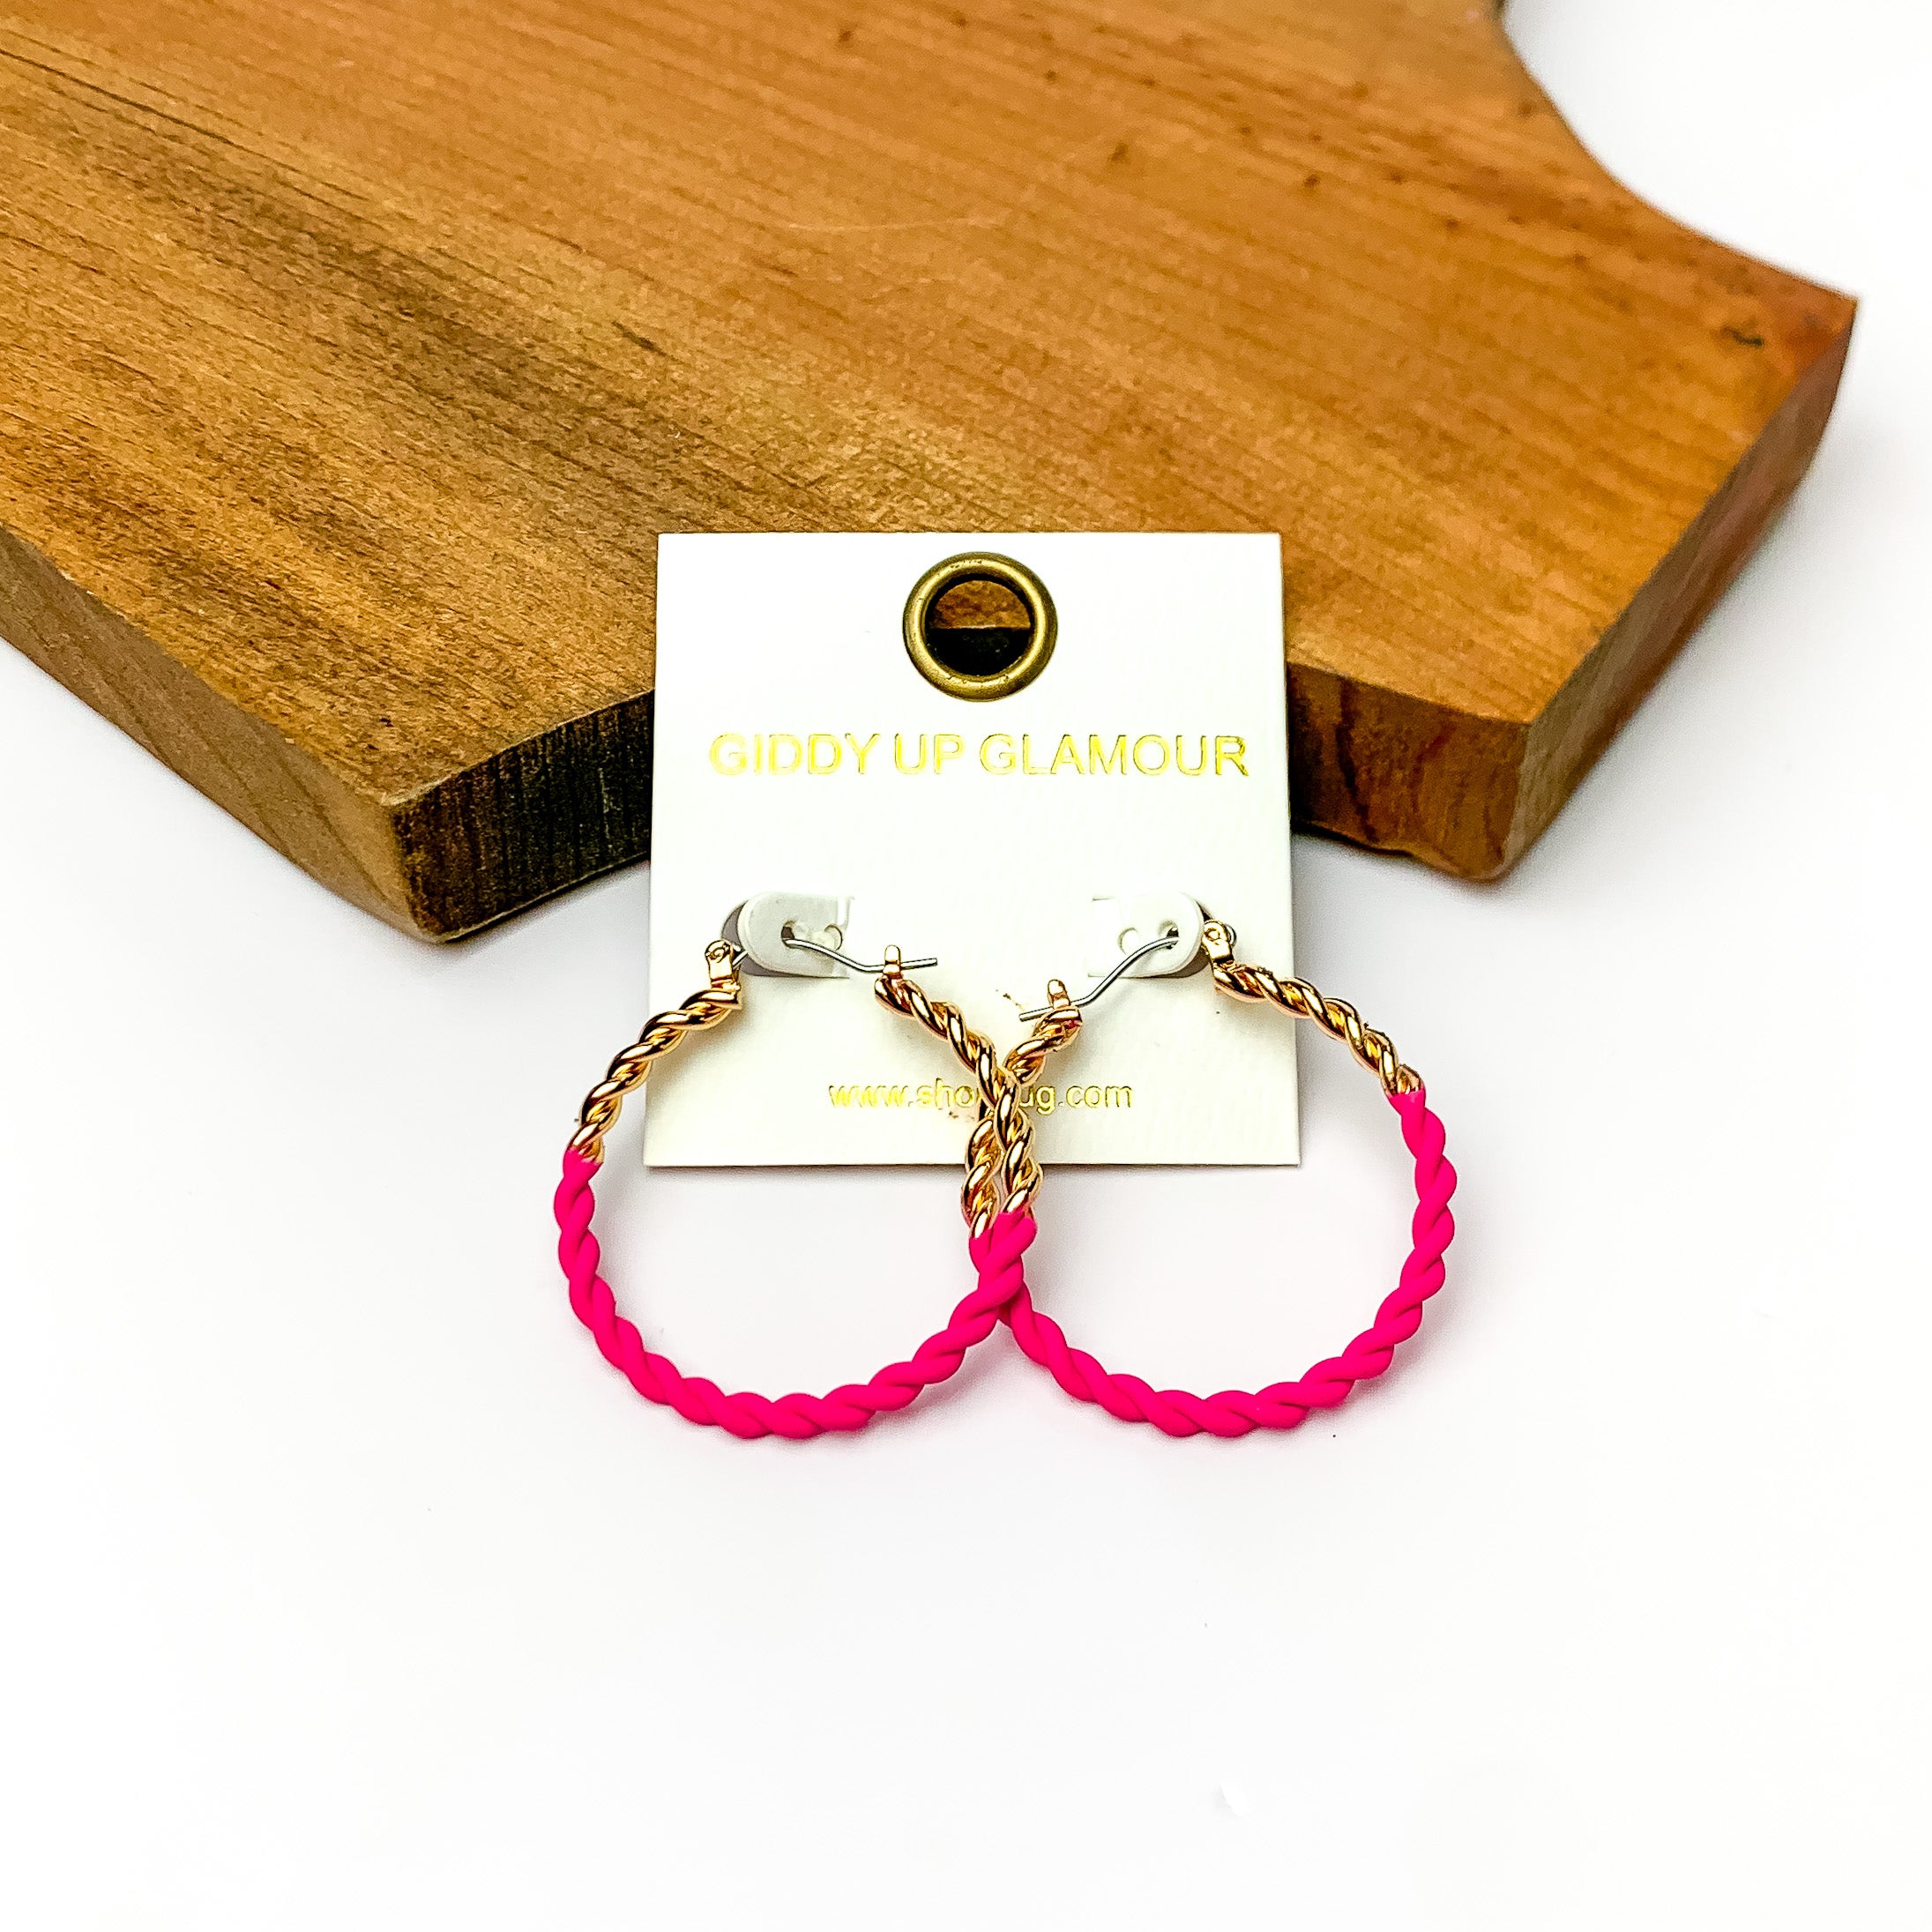 Twisted Gold Tone Hoop Earrings in Hot Pink. Pictured on a white background with wood at the top.